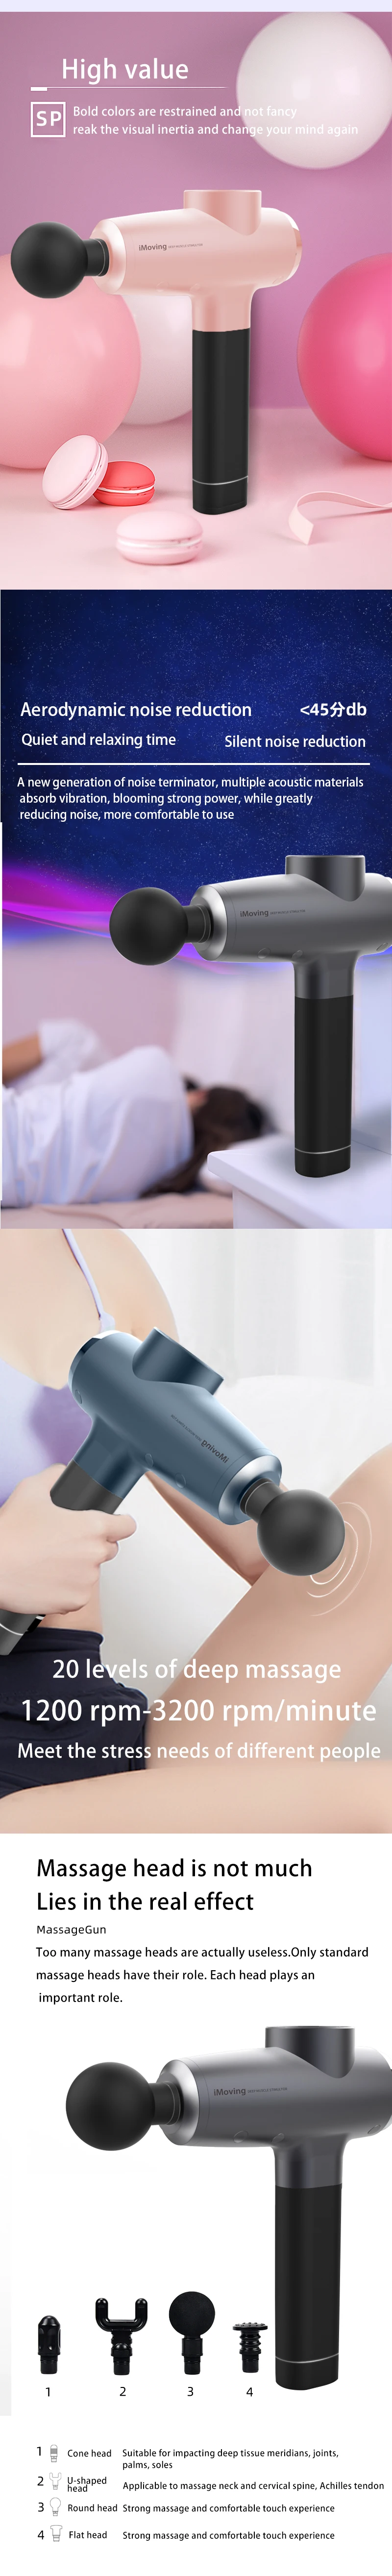 2020 new handheld deep tissue percussion massage gun for muscle aches and stiffness